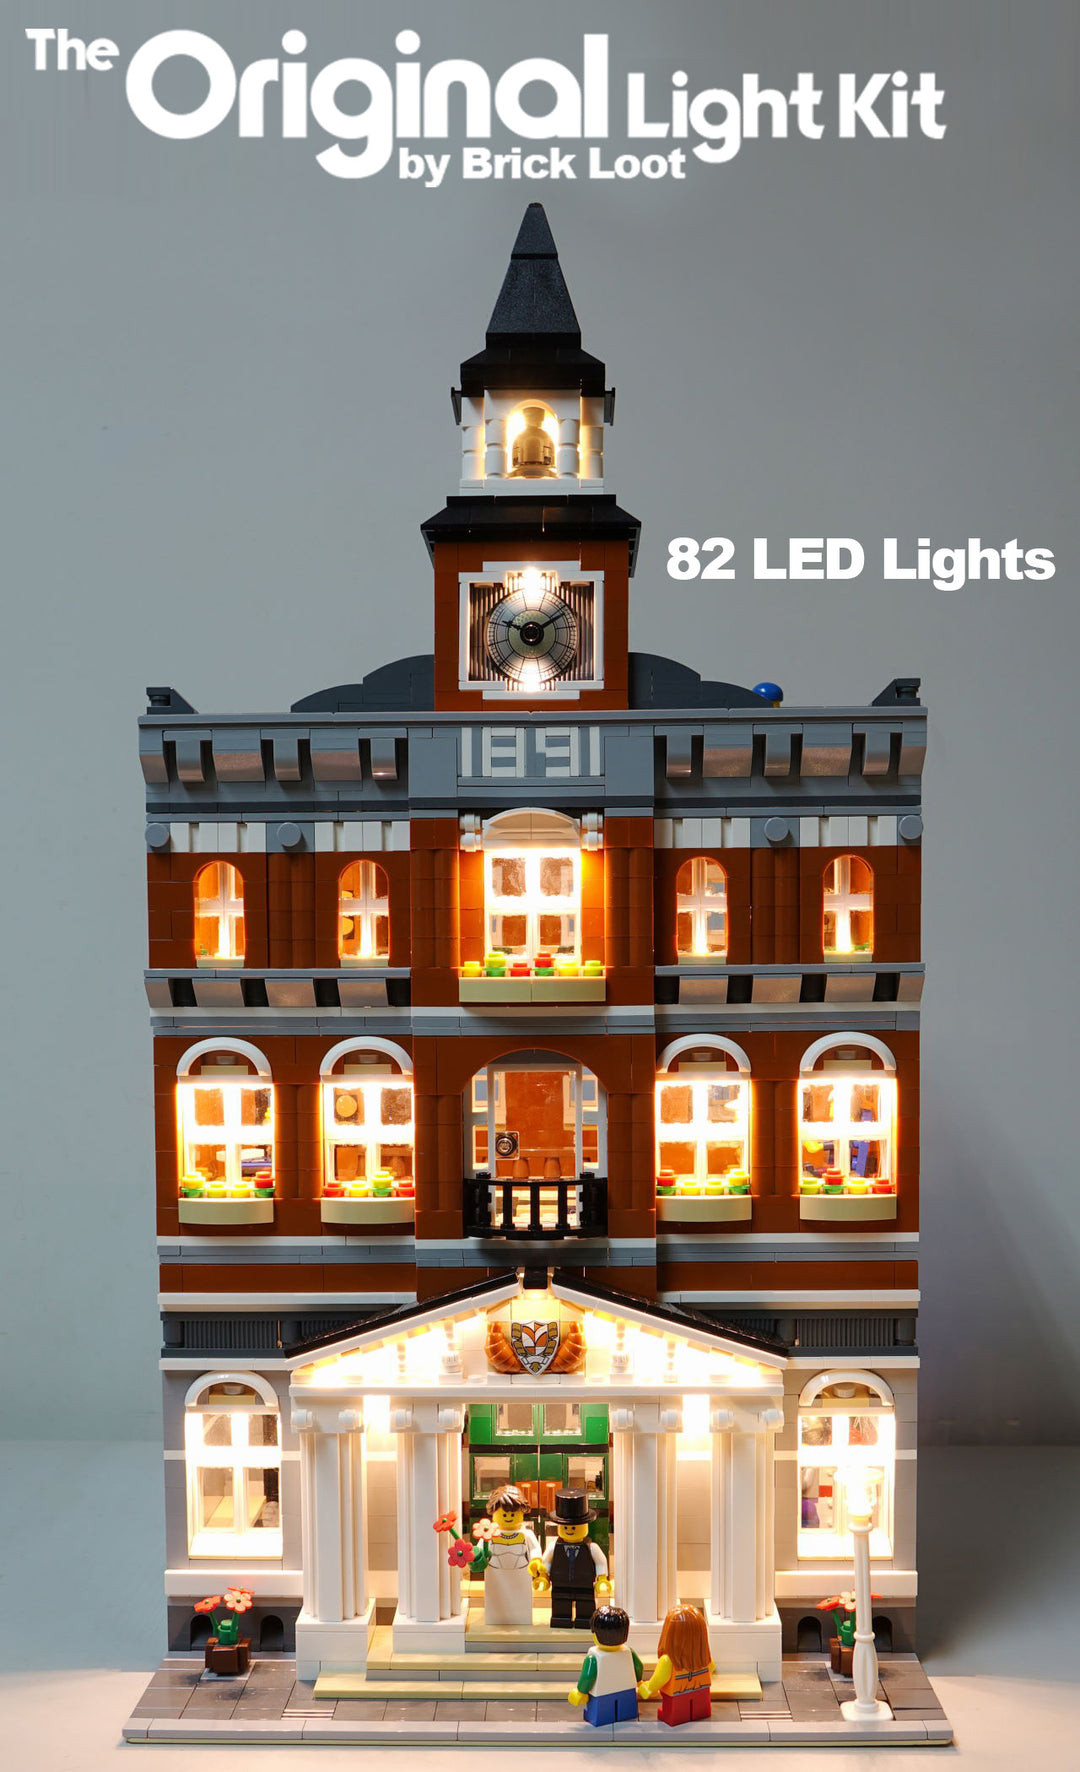 LEGO Town Hall set 10224, illuminated with the Brick Loot LED lighting kit with 82 LED lights. Bright in the day and at night.